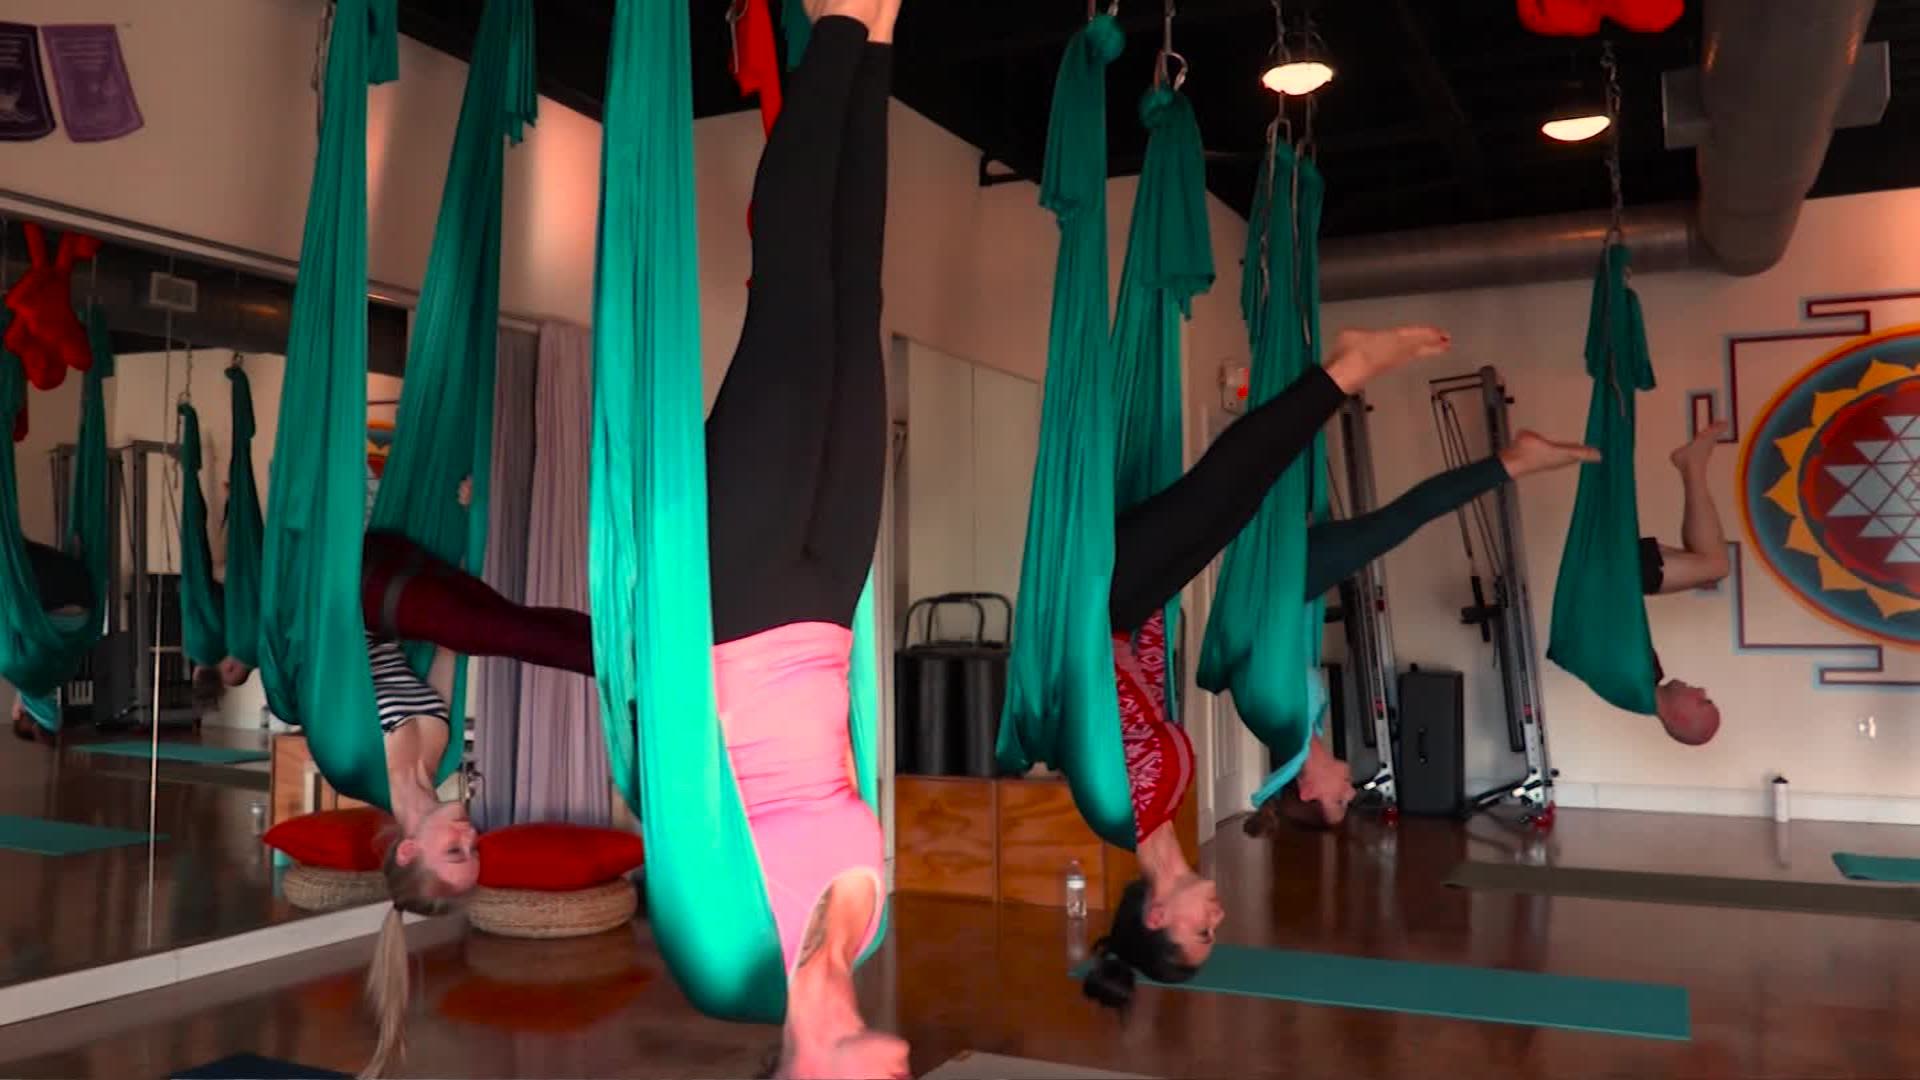 Yoga Inversion Swing with Free Video Series and Pose Chart, Antigravity Yoga  Sling for Beginners & Advanced 